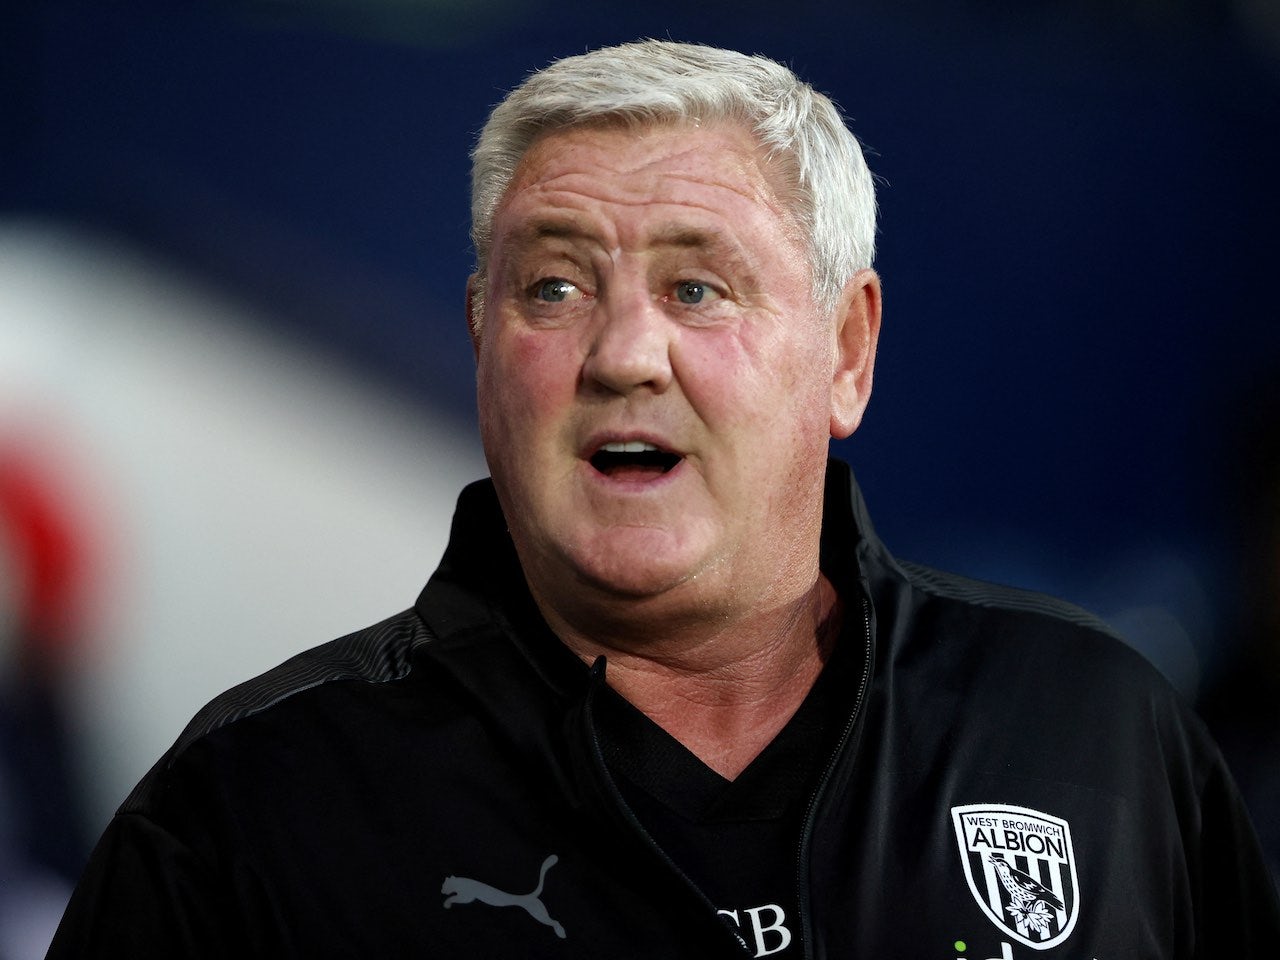 Preview: Wigan Athletic vs. West Bromwich Albion - prediction, team news, lineups